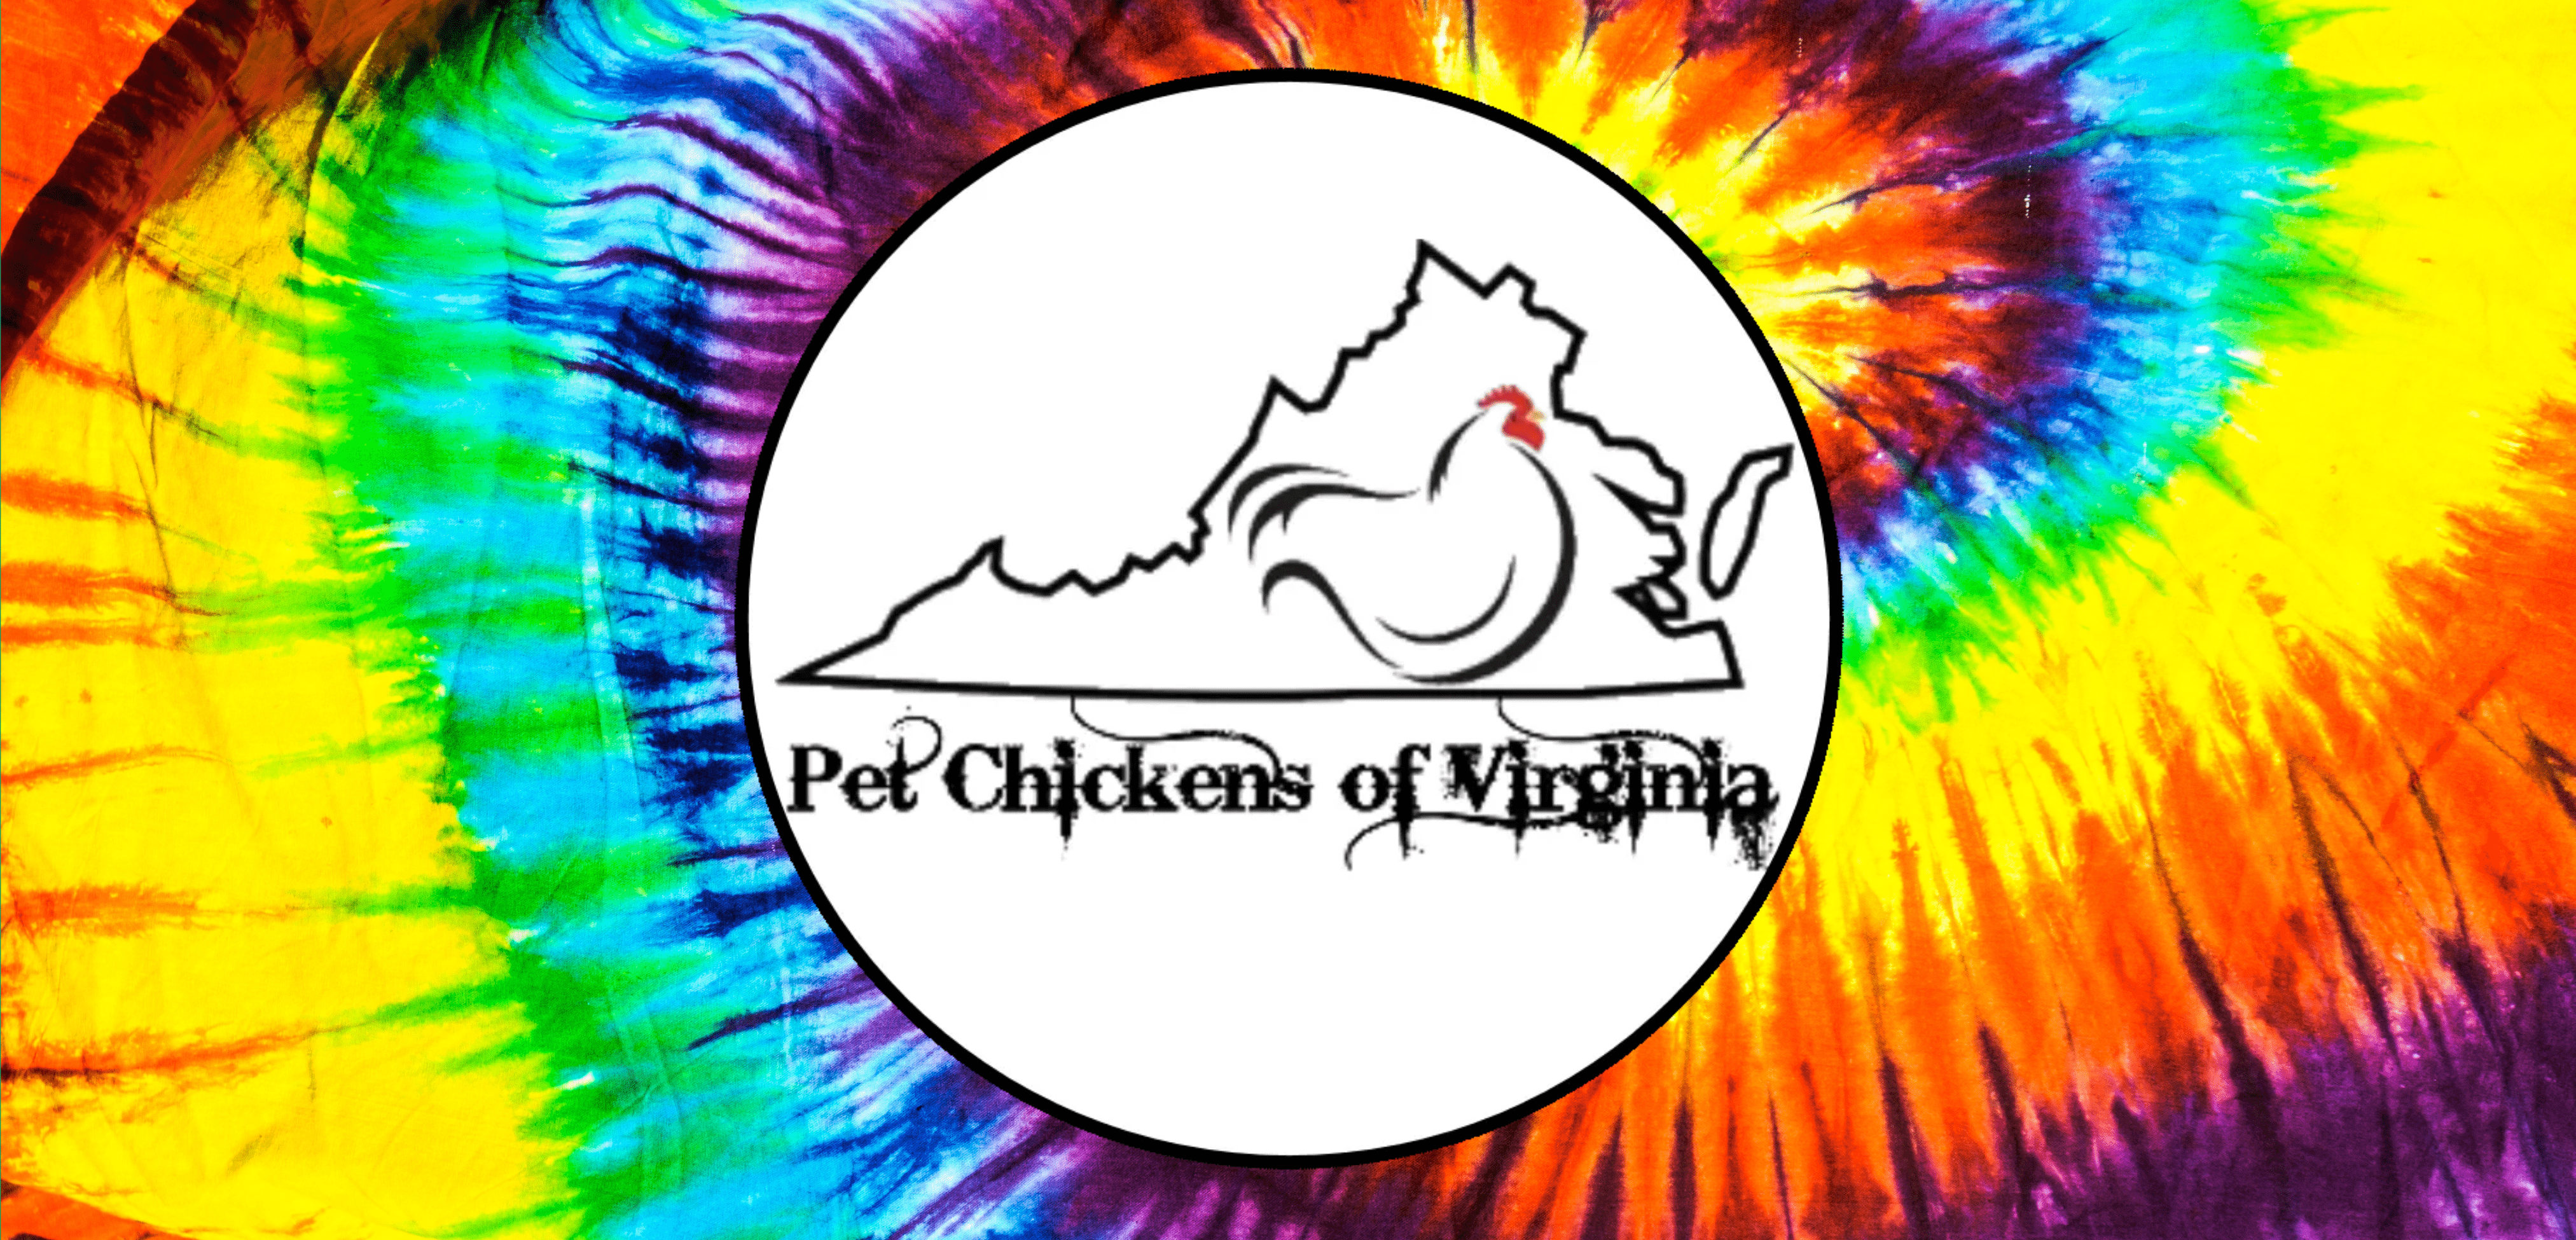 PCOV CLUCKS - The Social Media Connection for Virginia Poultry Lovers!